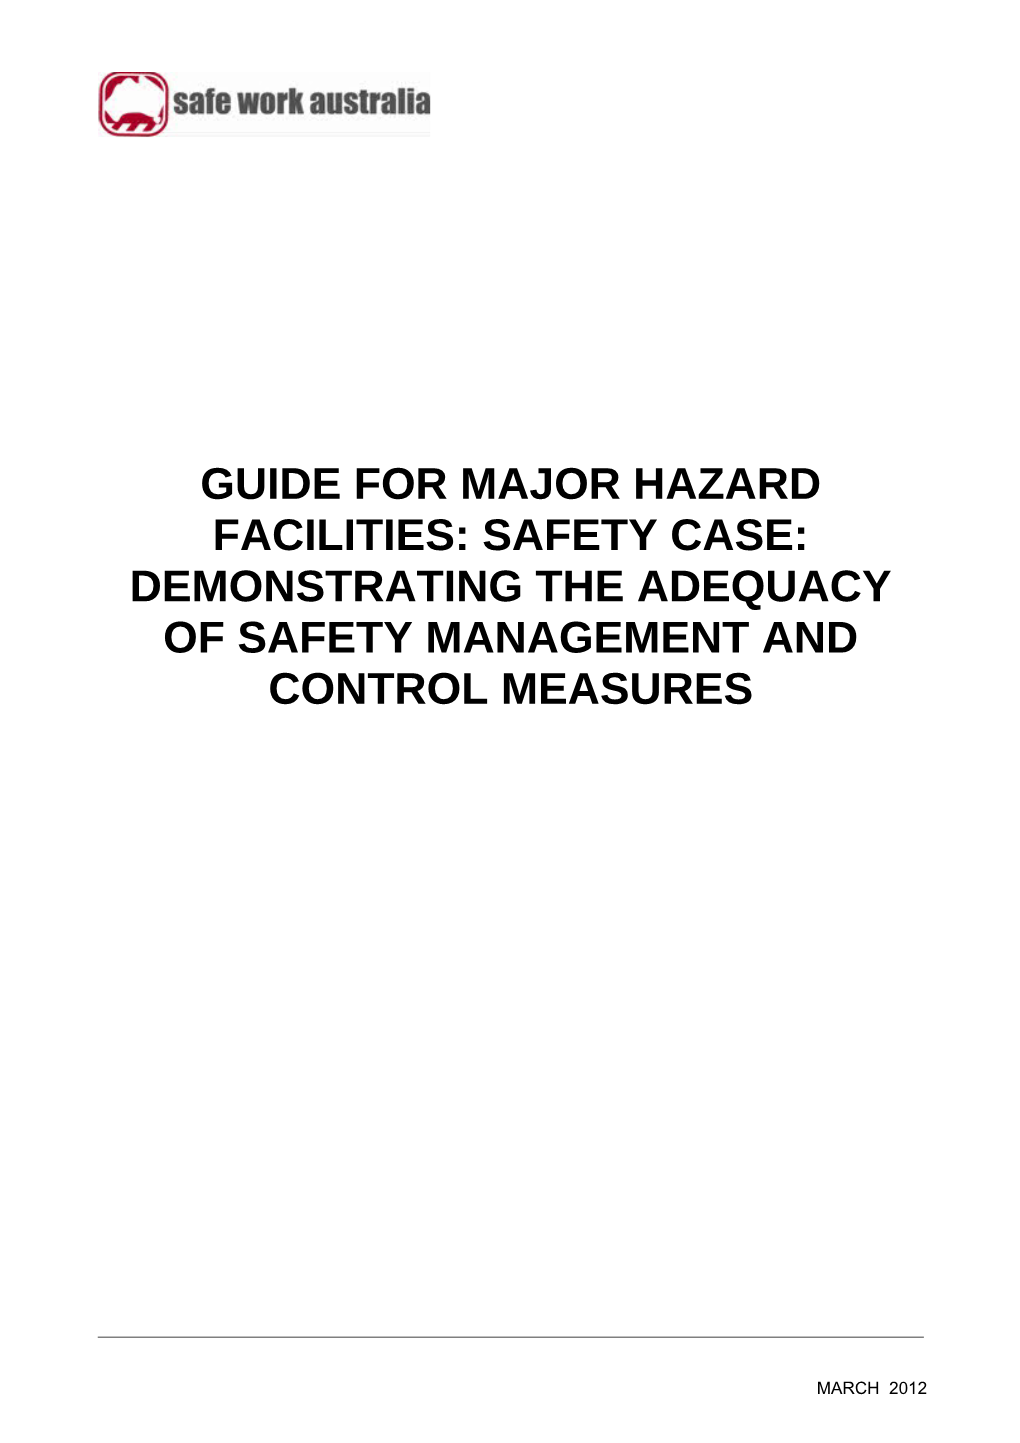 Guide for Major Hazard Facilities - Safety Case: Demonstrating the Adequacy of Safety Measures